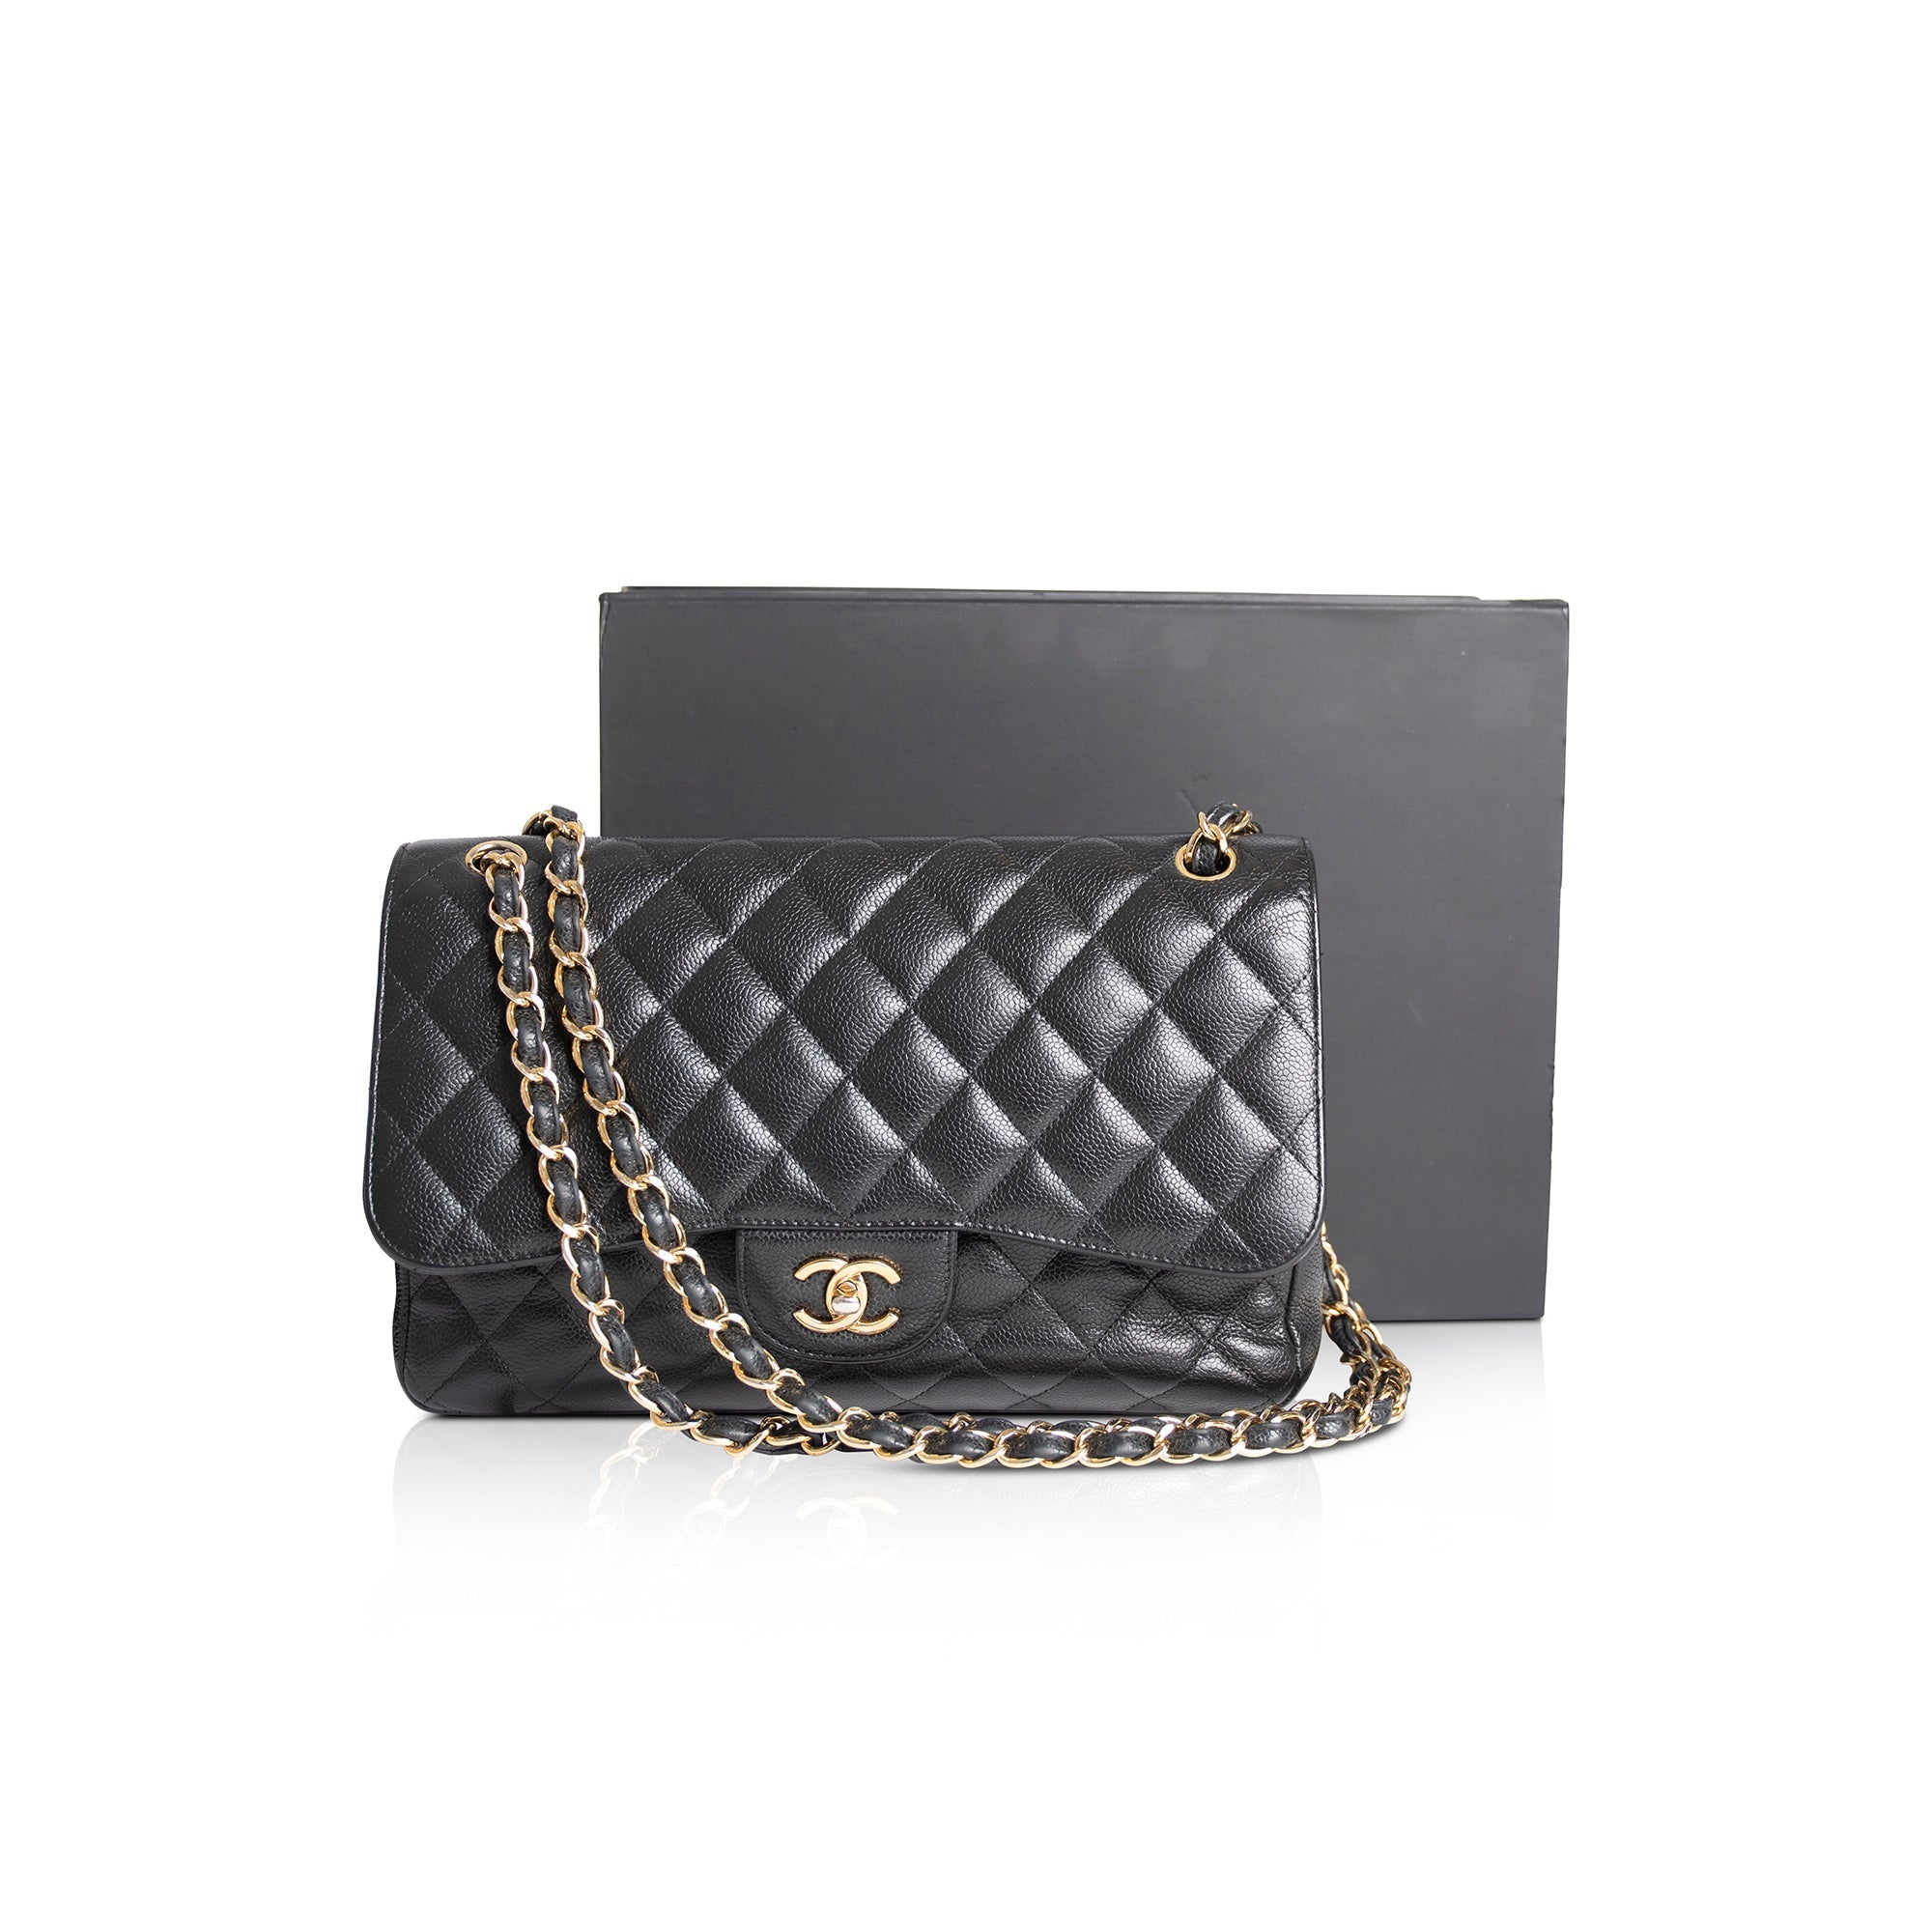 Chanel // Black Quilted Caviar Leather 19S Jumbo Shoulder Bag